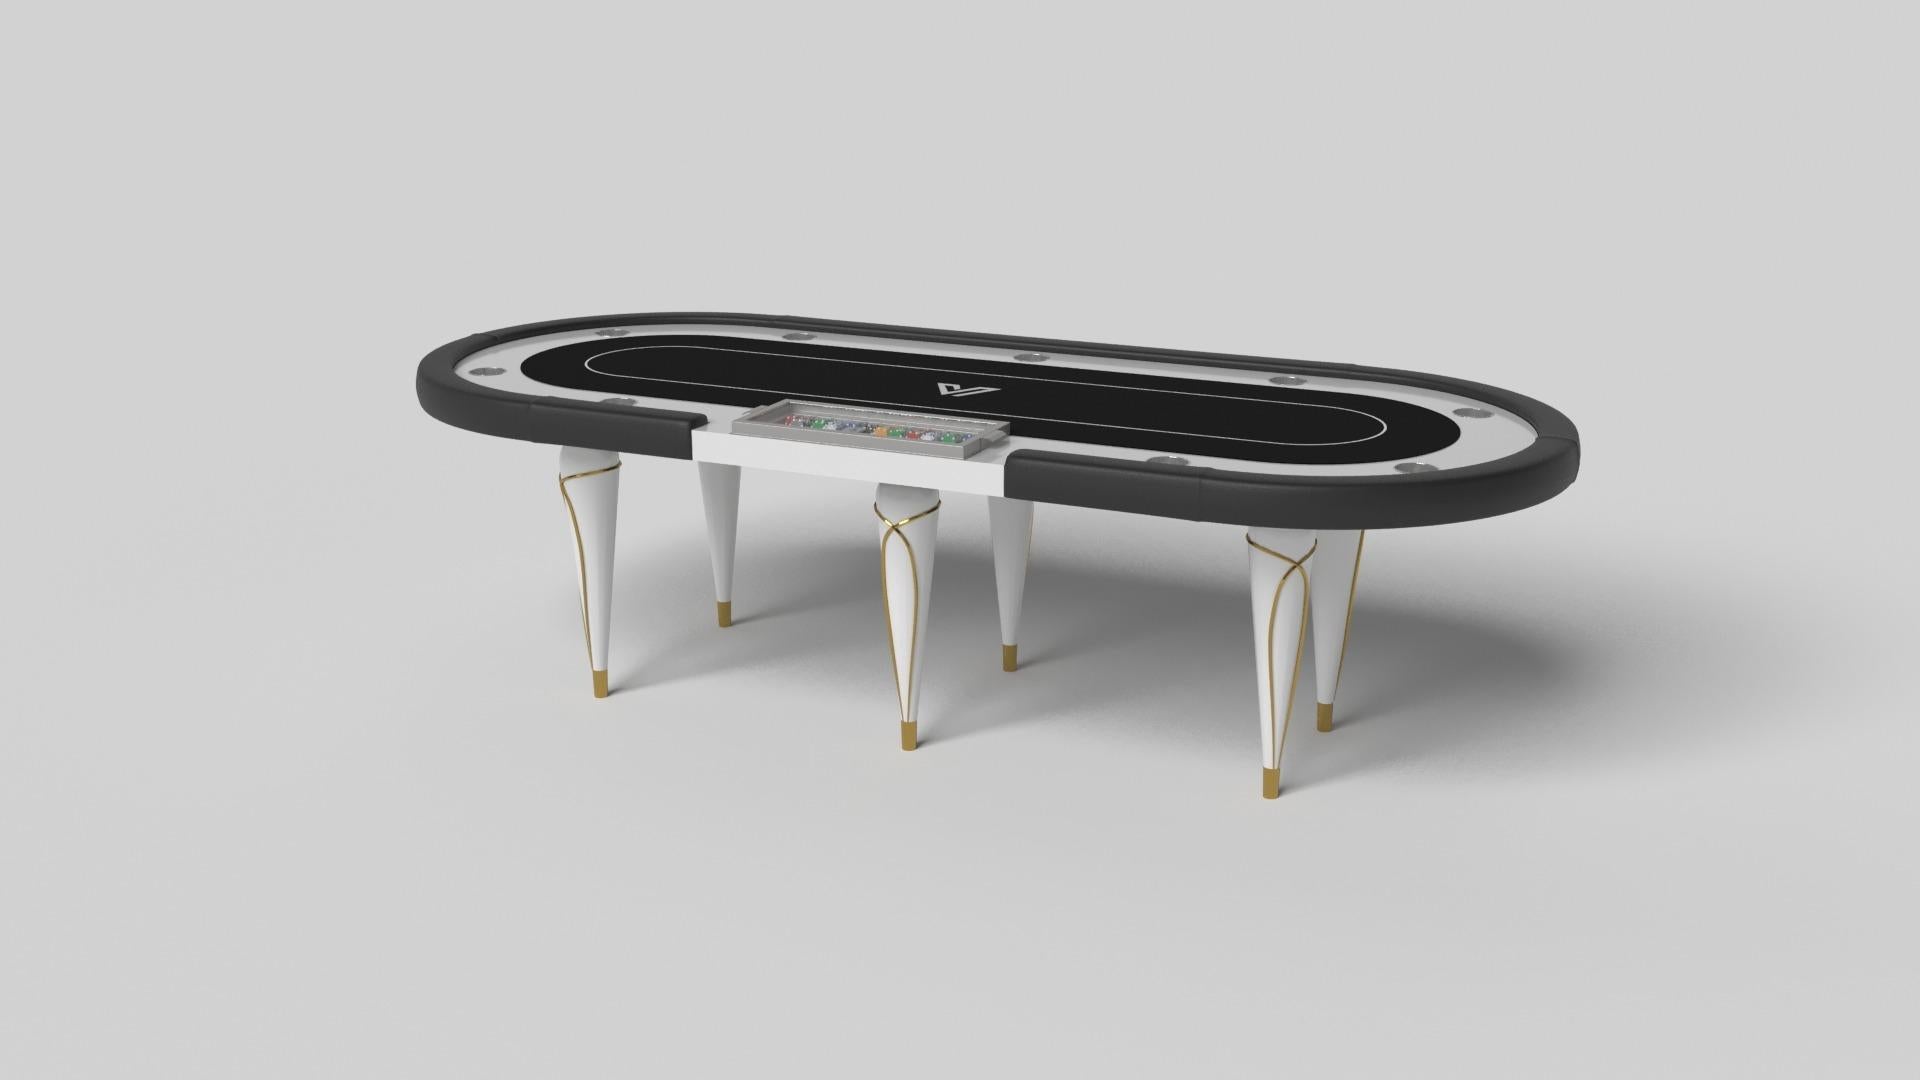 Champagne gold accents add undeniable elegance to this luxury poker table. Offering superior playability and uncompromised style, this design features hand carved details, decorative metal elements, and metal sabots at the bottom of each leg. The